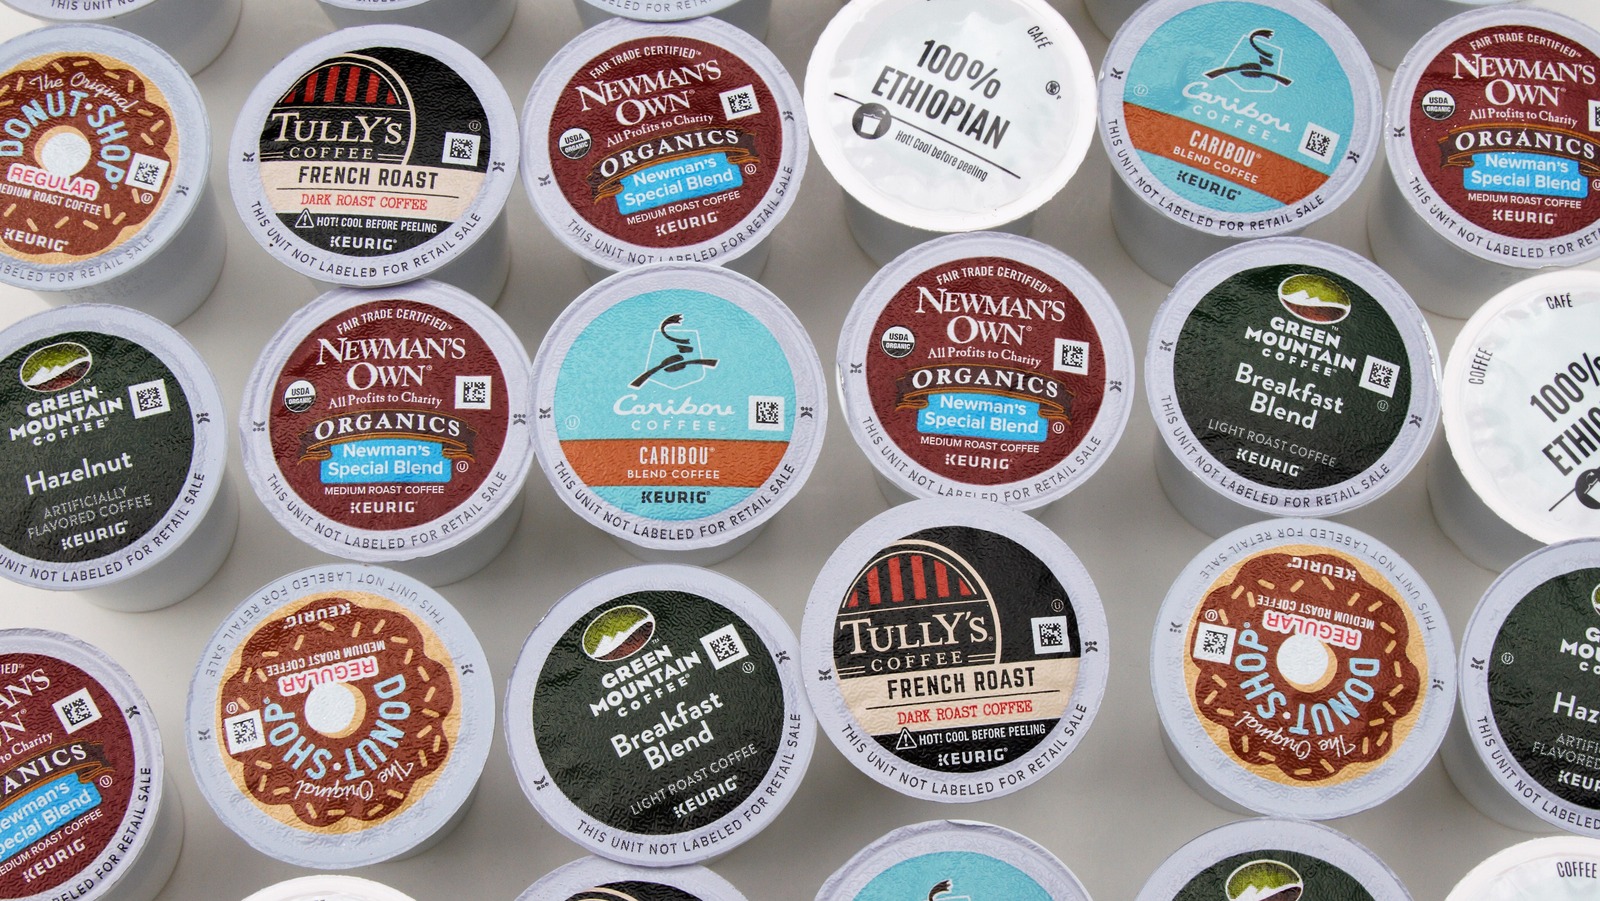 Coffee Lovers, It's Time to Stop Using K-Cups